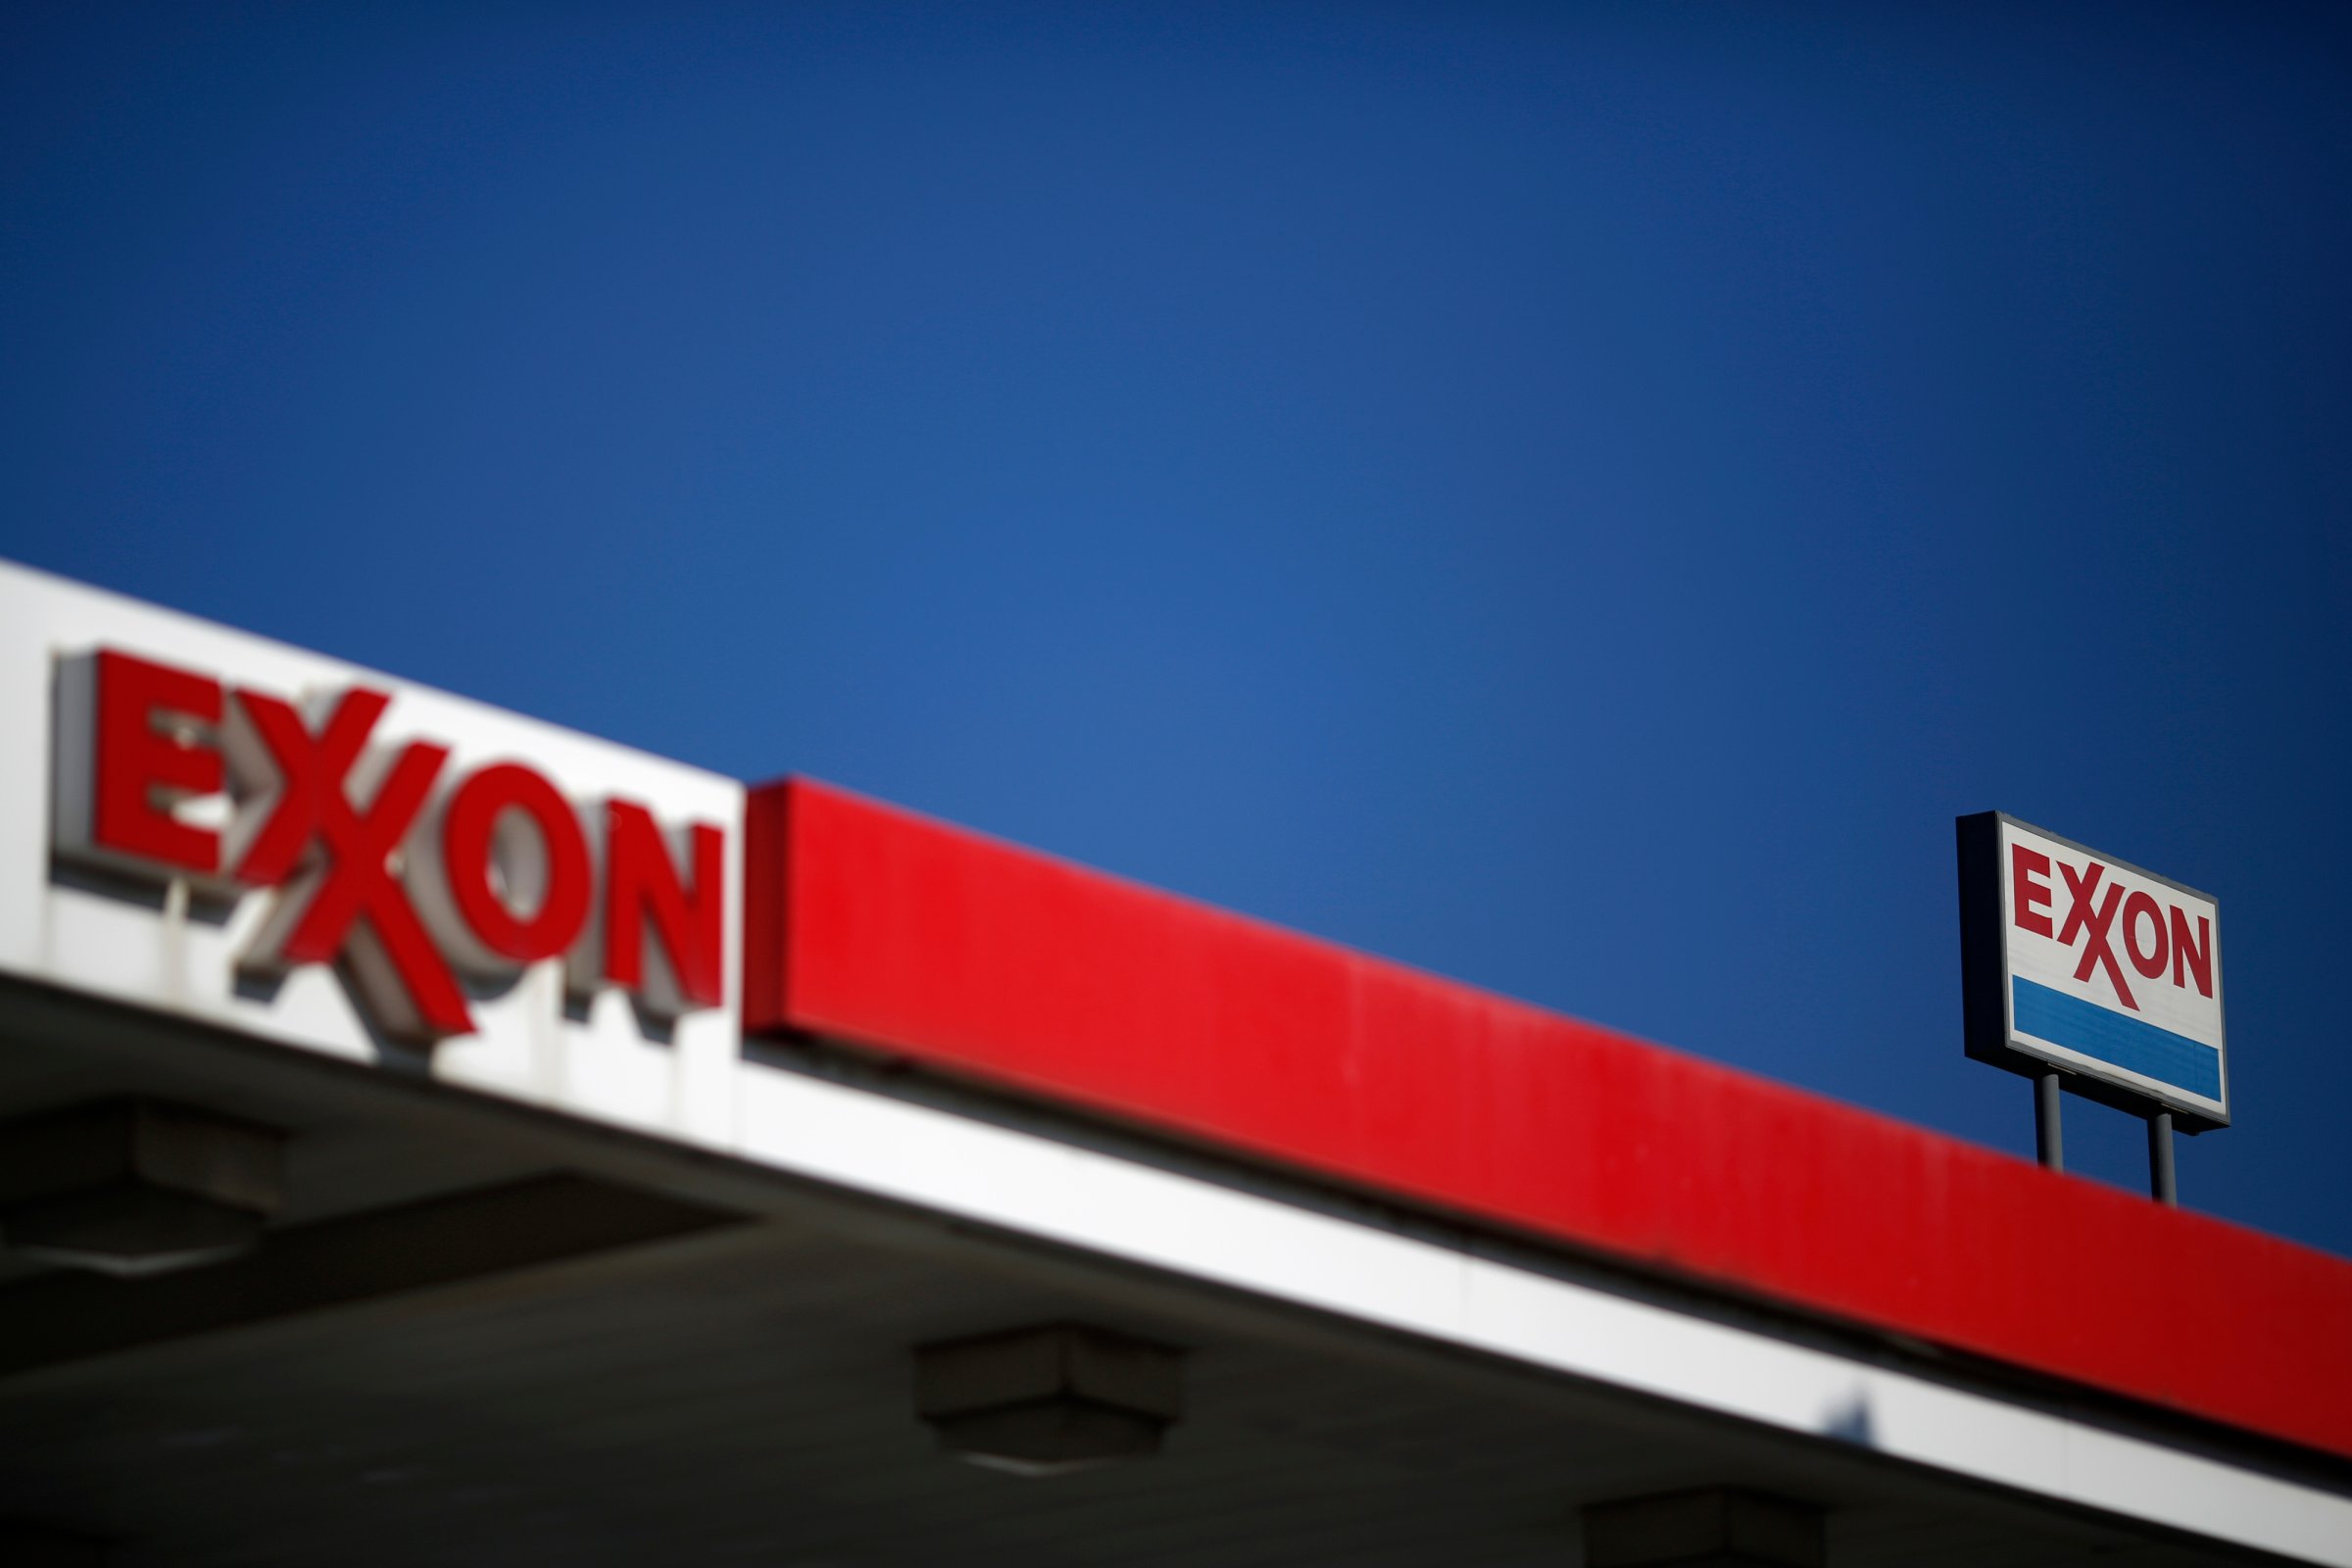 An Exxon Mobil Corp. gas station in Nashville, Tennessee on Jan. 16, 2015.